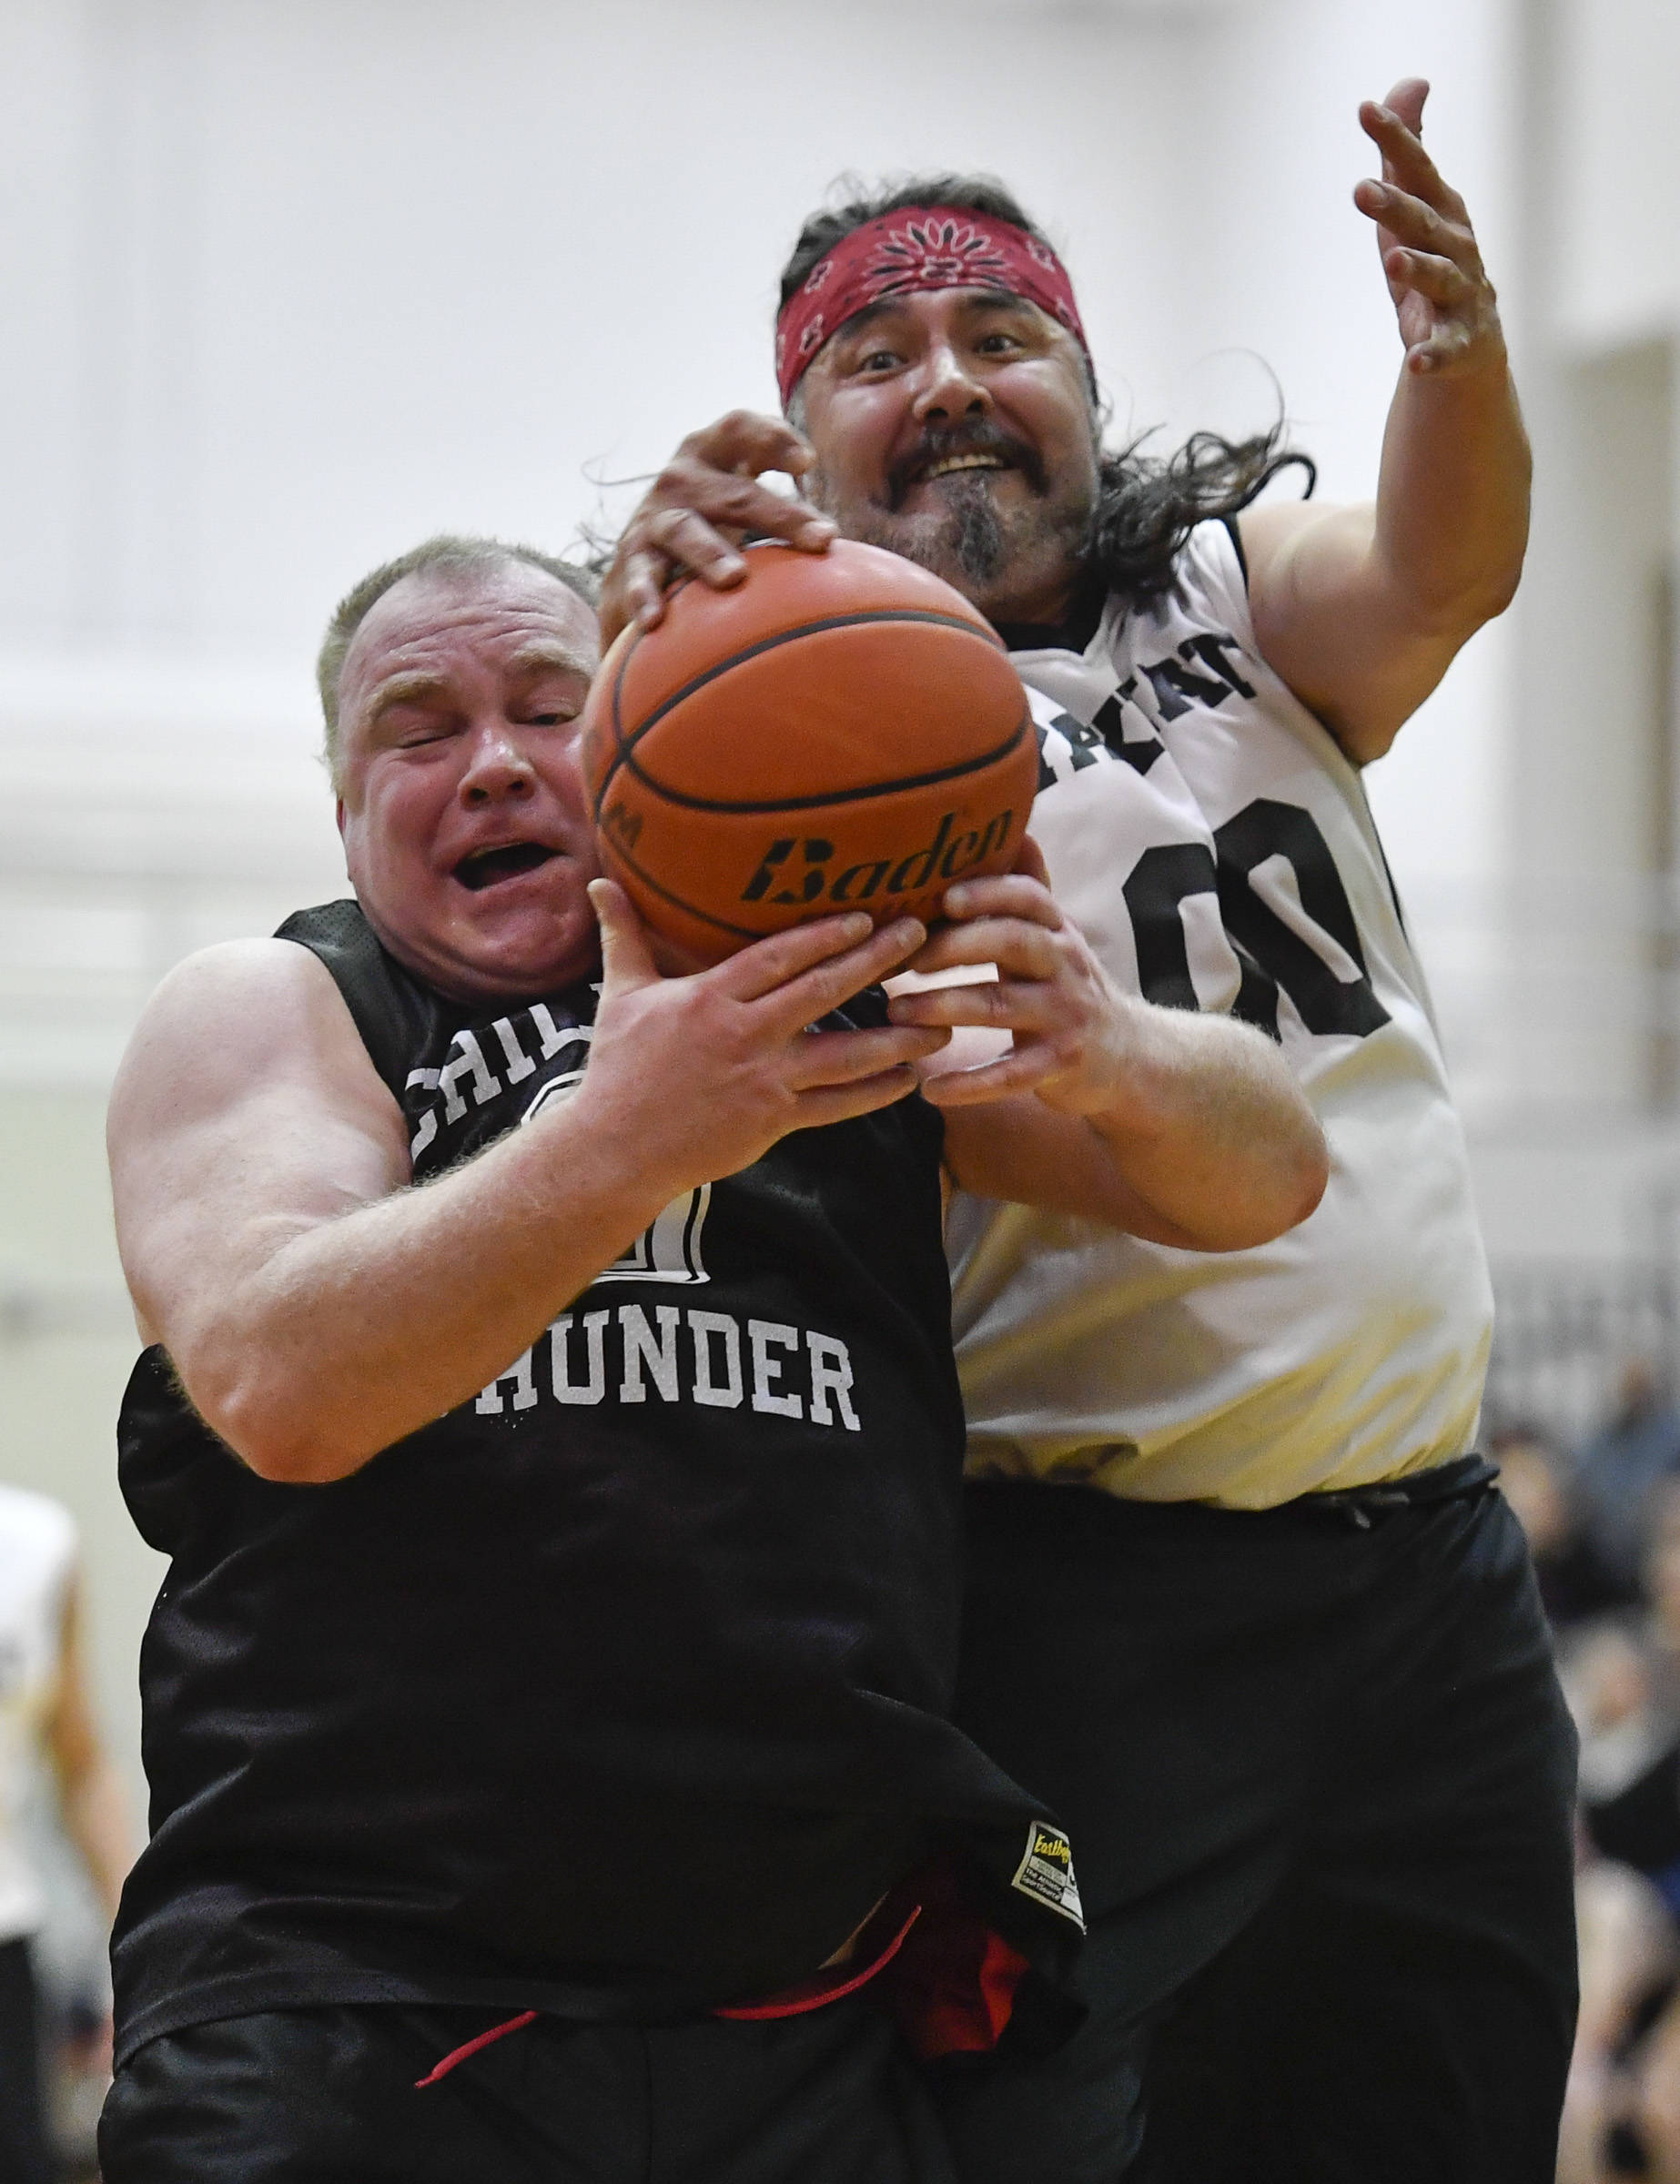 Klukwan’s Eric McCormick, left, and Yakutat’s Gary Klushkan battle for a rebound during their Masters bracket game at the Juneau Lions Club 73rd Annual Gold Medal Basketball Tournament at Juneau-Douglas High School on Friday, March 22, 2019. Klukwan won 63-58. (Michael Penn | Juneau Empire)